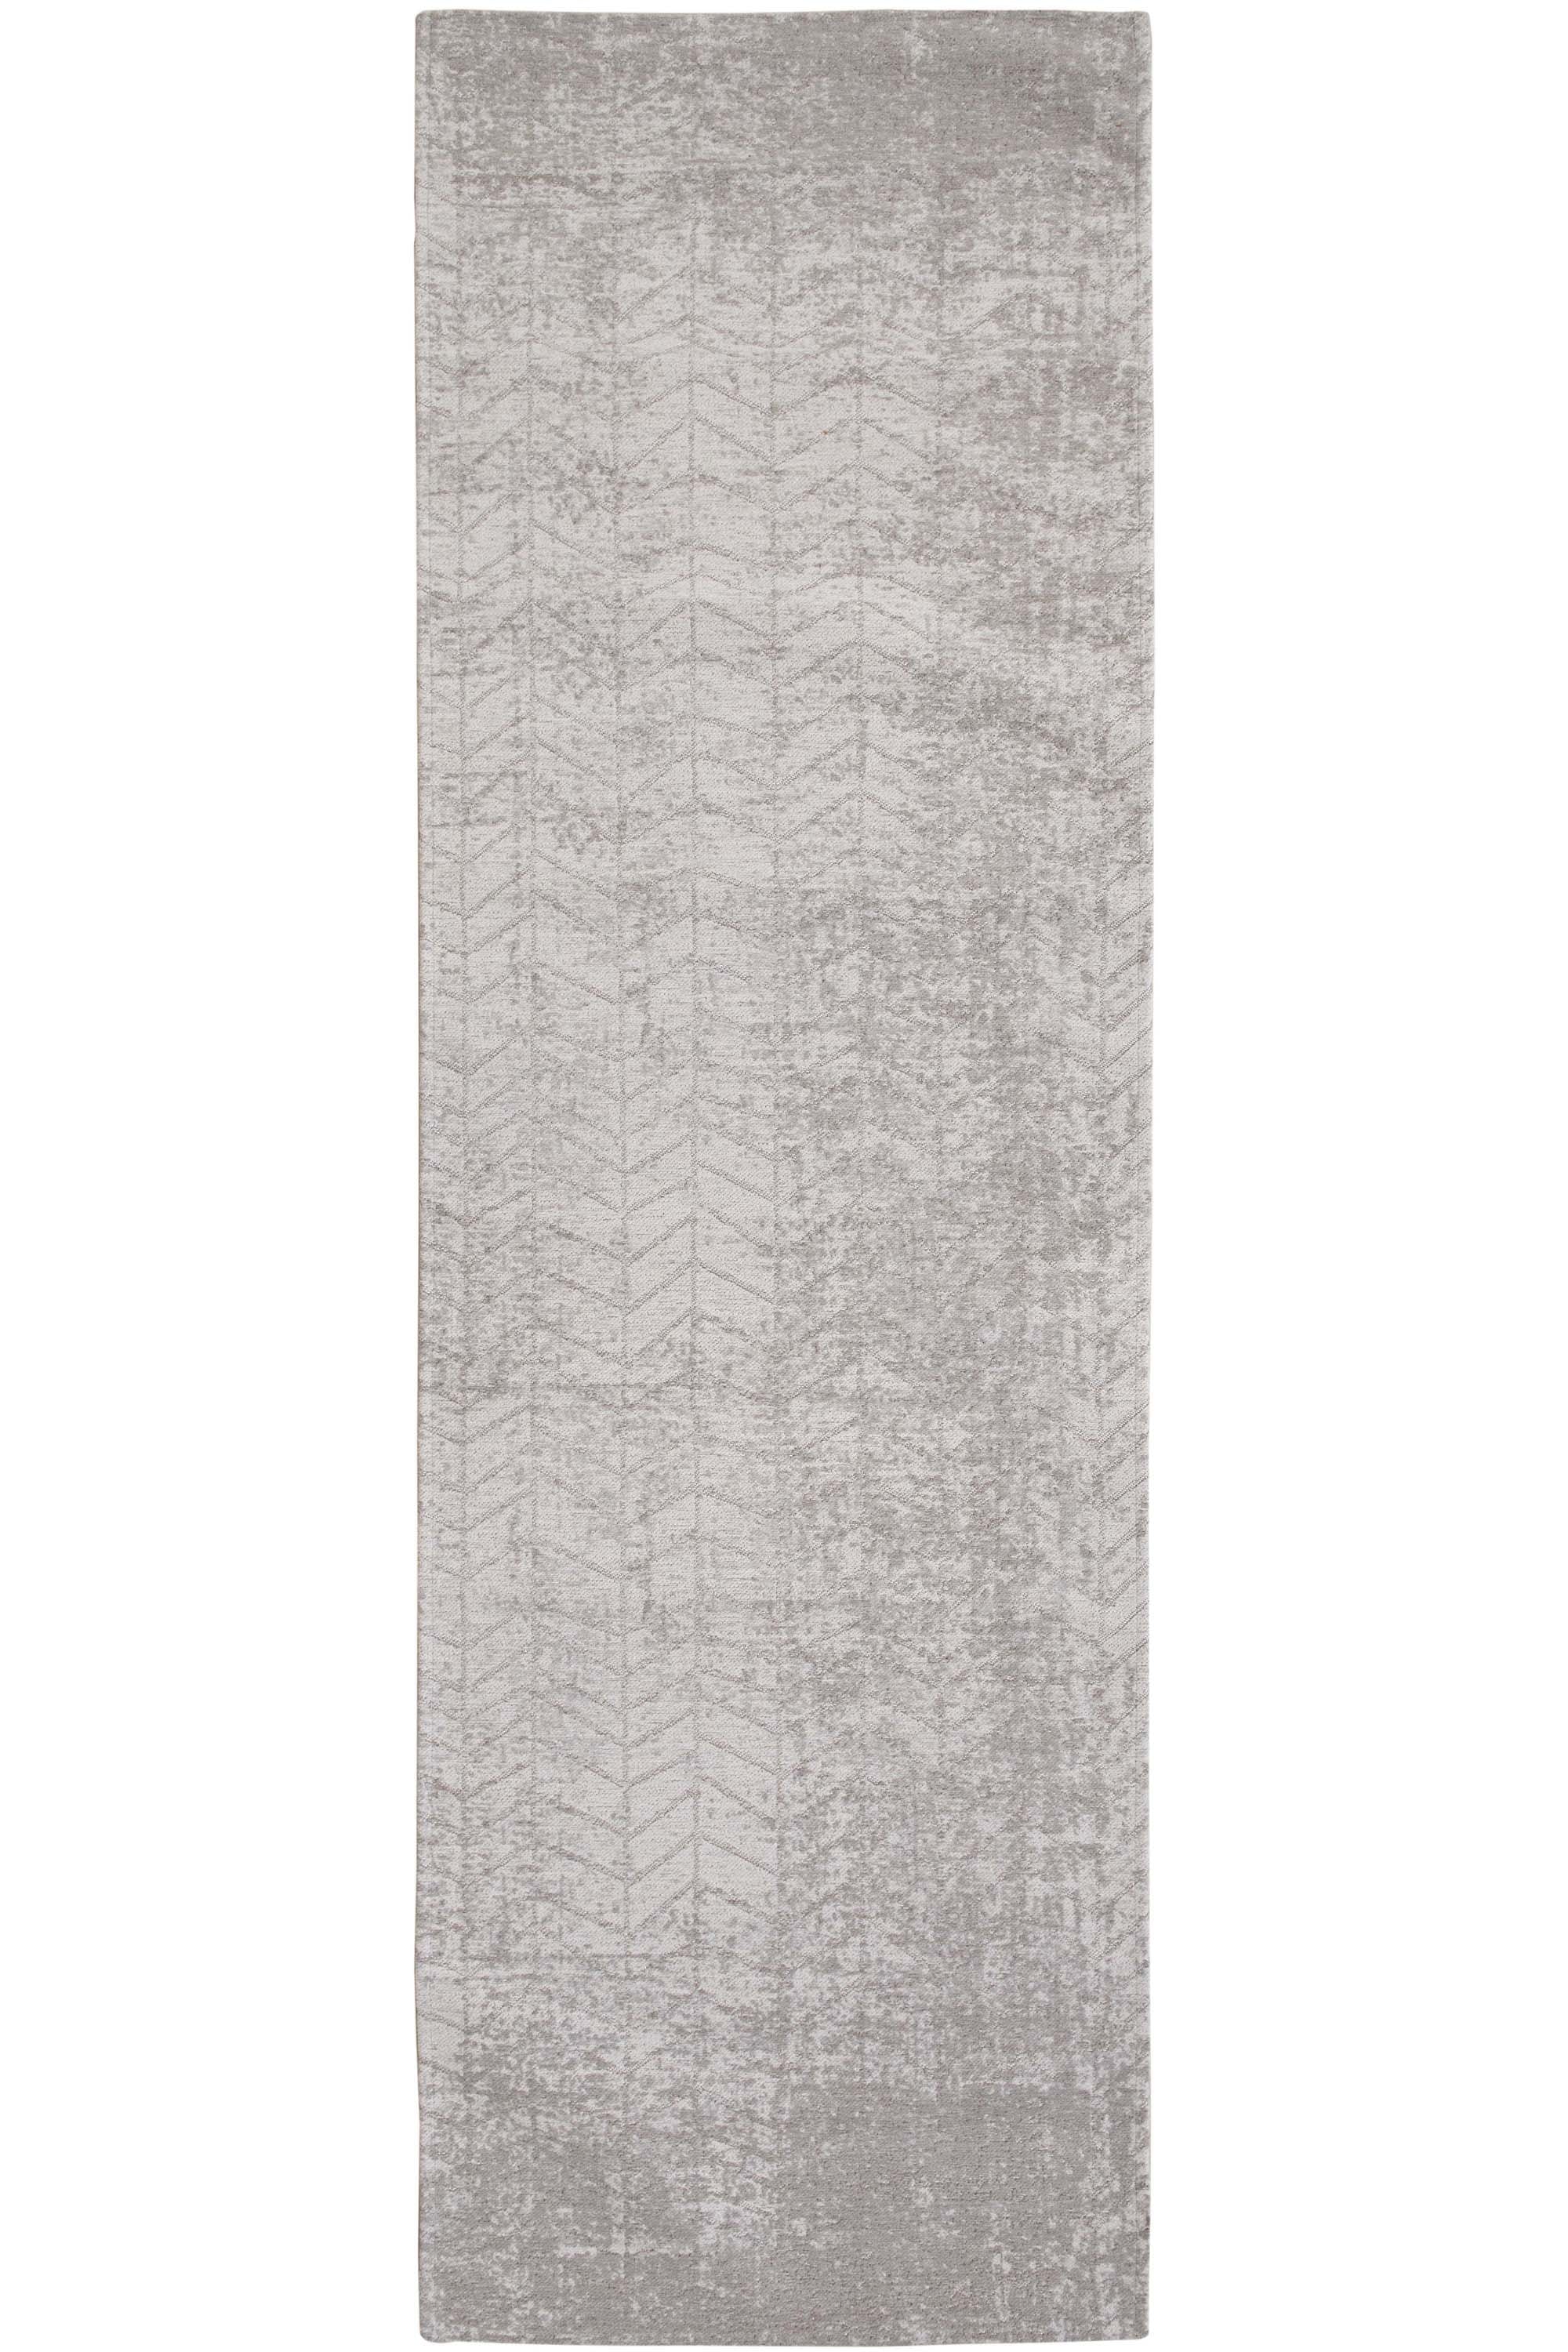 Ivory flatweave runner rug with faded grey chevron pattern